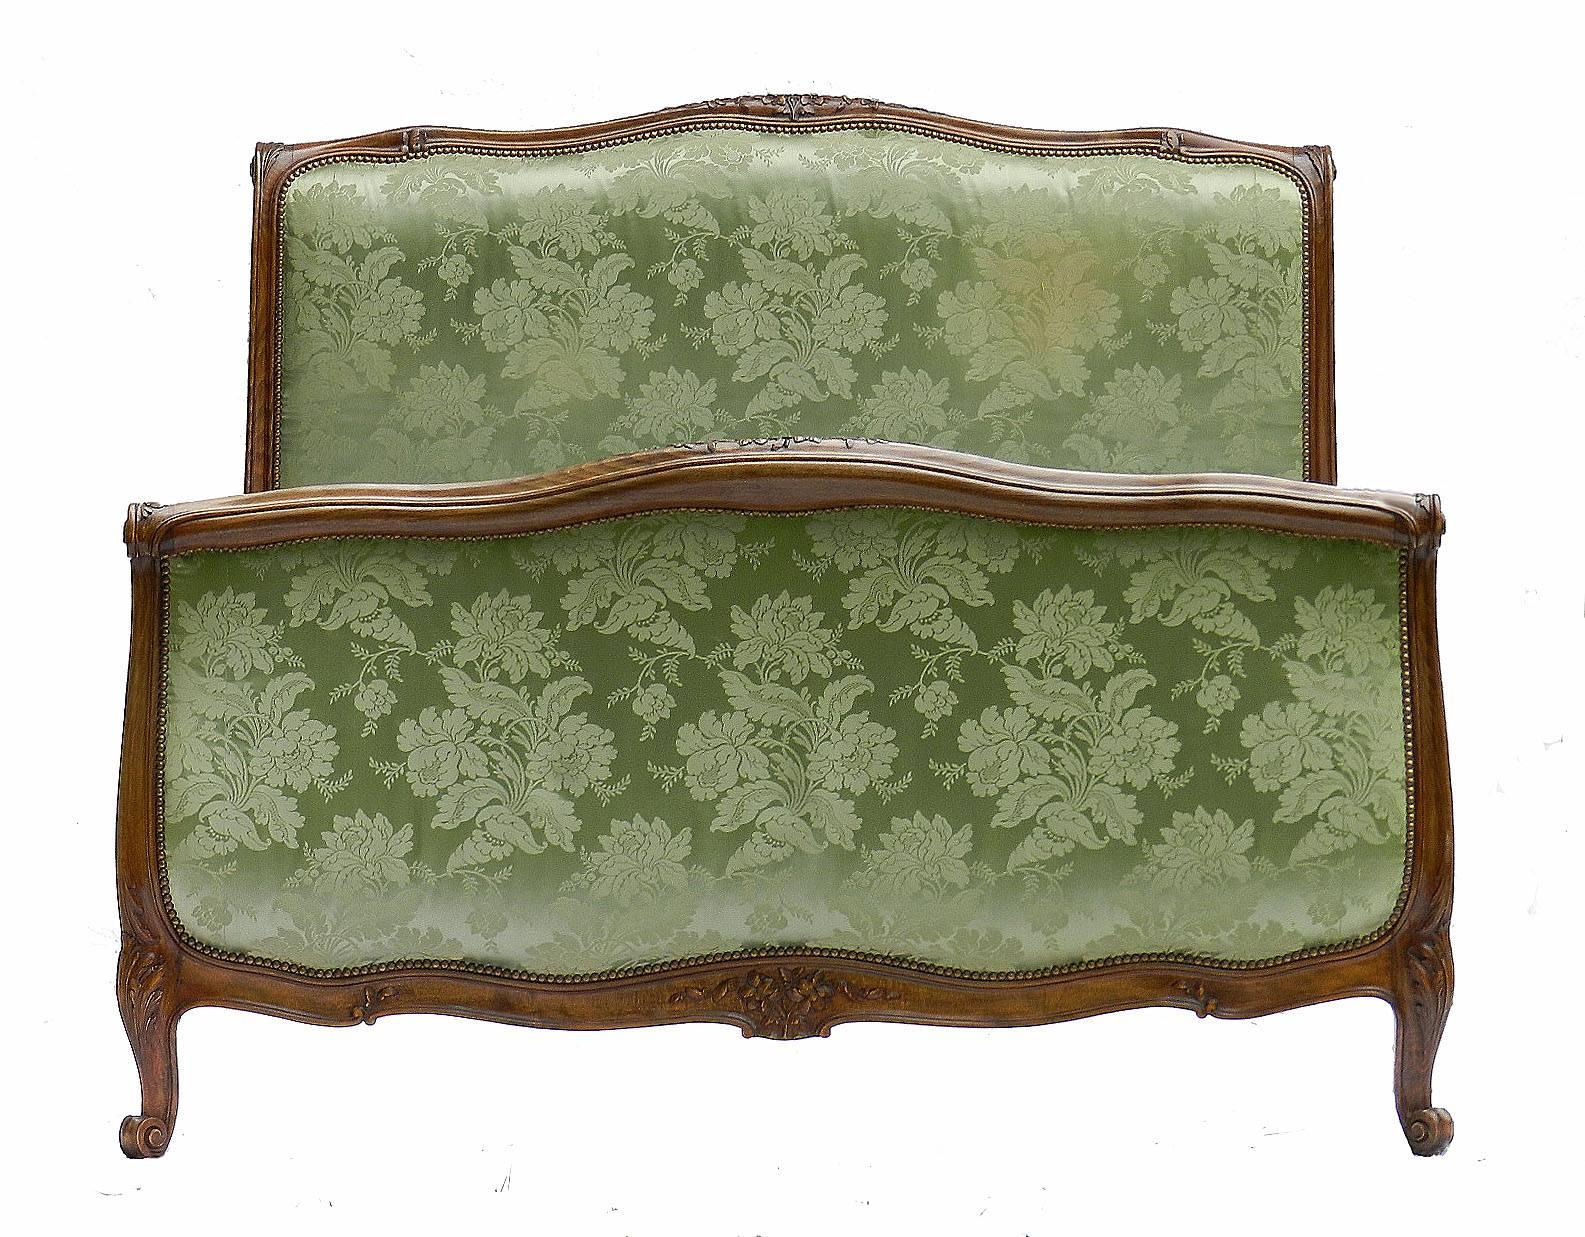 French antique bed scroll end early 20th century Louis revival includes recovering (excludes cost of fabric)
Upholstery in very good antique condition with only the top covers to change
Carved wood frame with scroll ends
This bed will take a